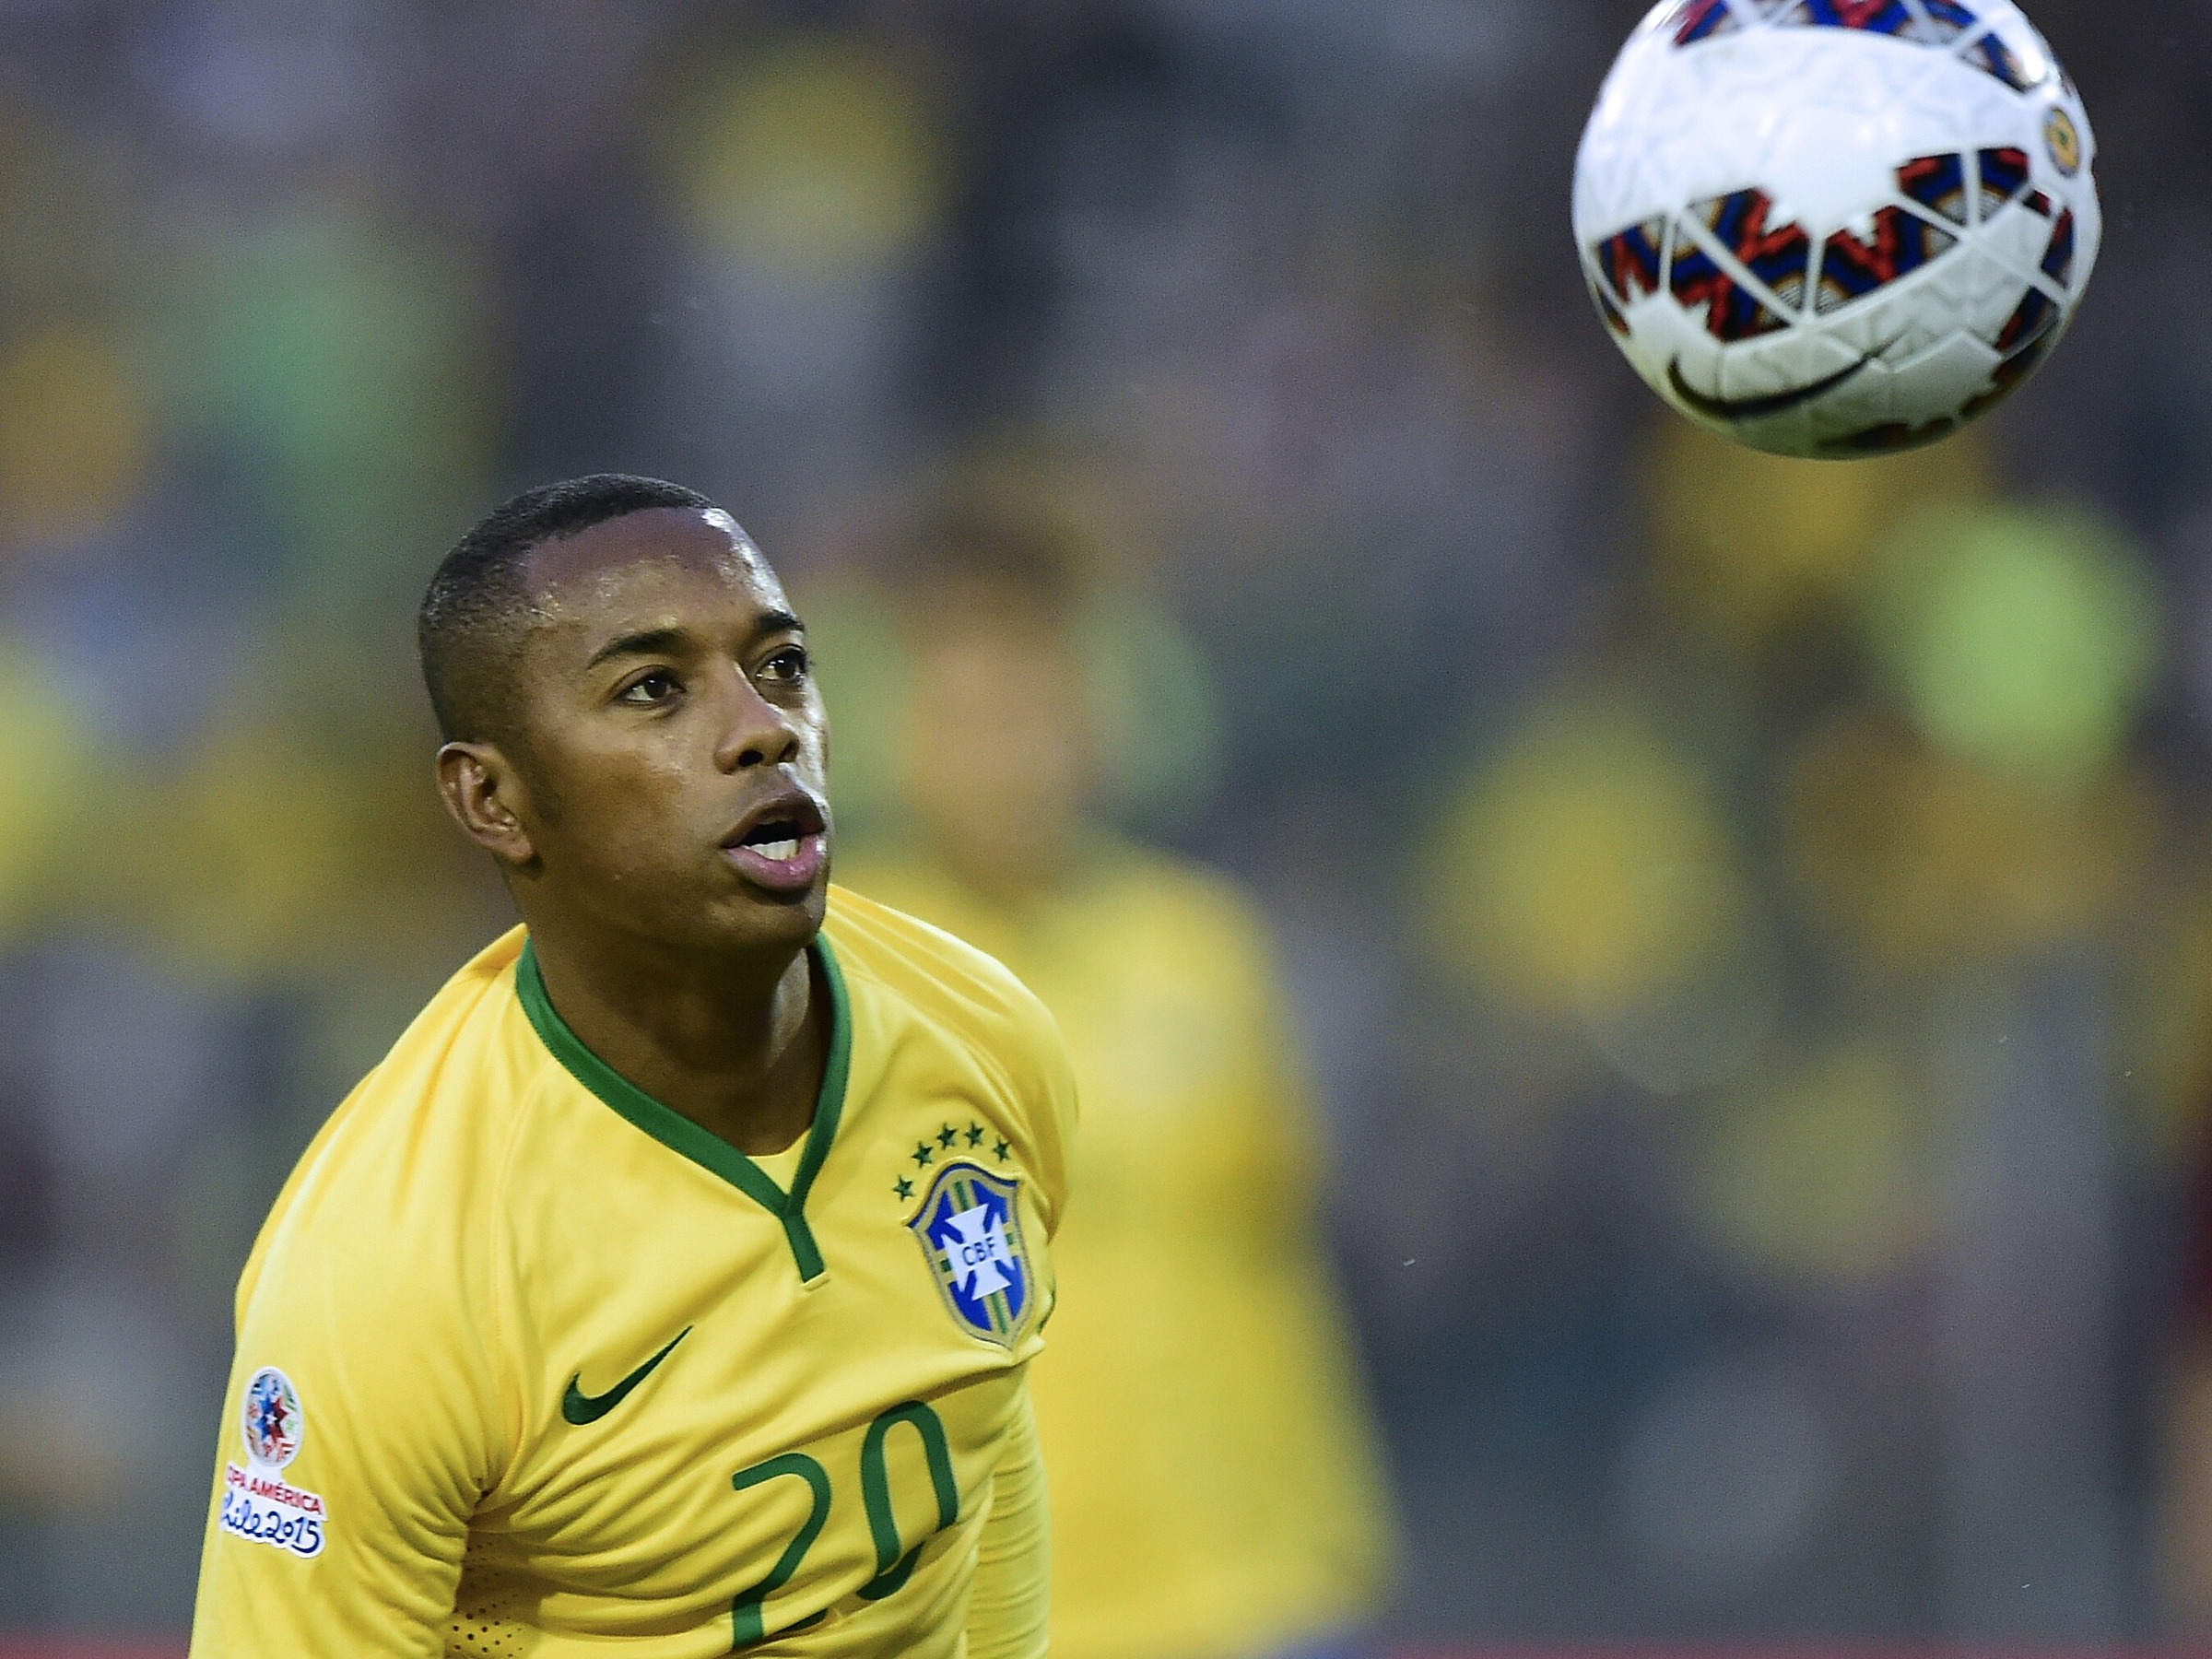 Brazil's forward Robinho eyes the ball during the 2015 Copa America football championship match against Venezuela, in Santiago, on June 21, 2015. AFP PHOTO / LUIS ACOSTA (Photo credit should read LUIS ACOSTA/AFP via Getty Images)